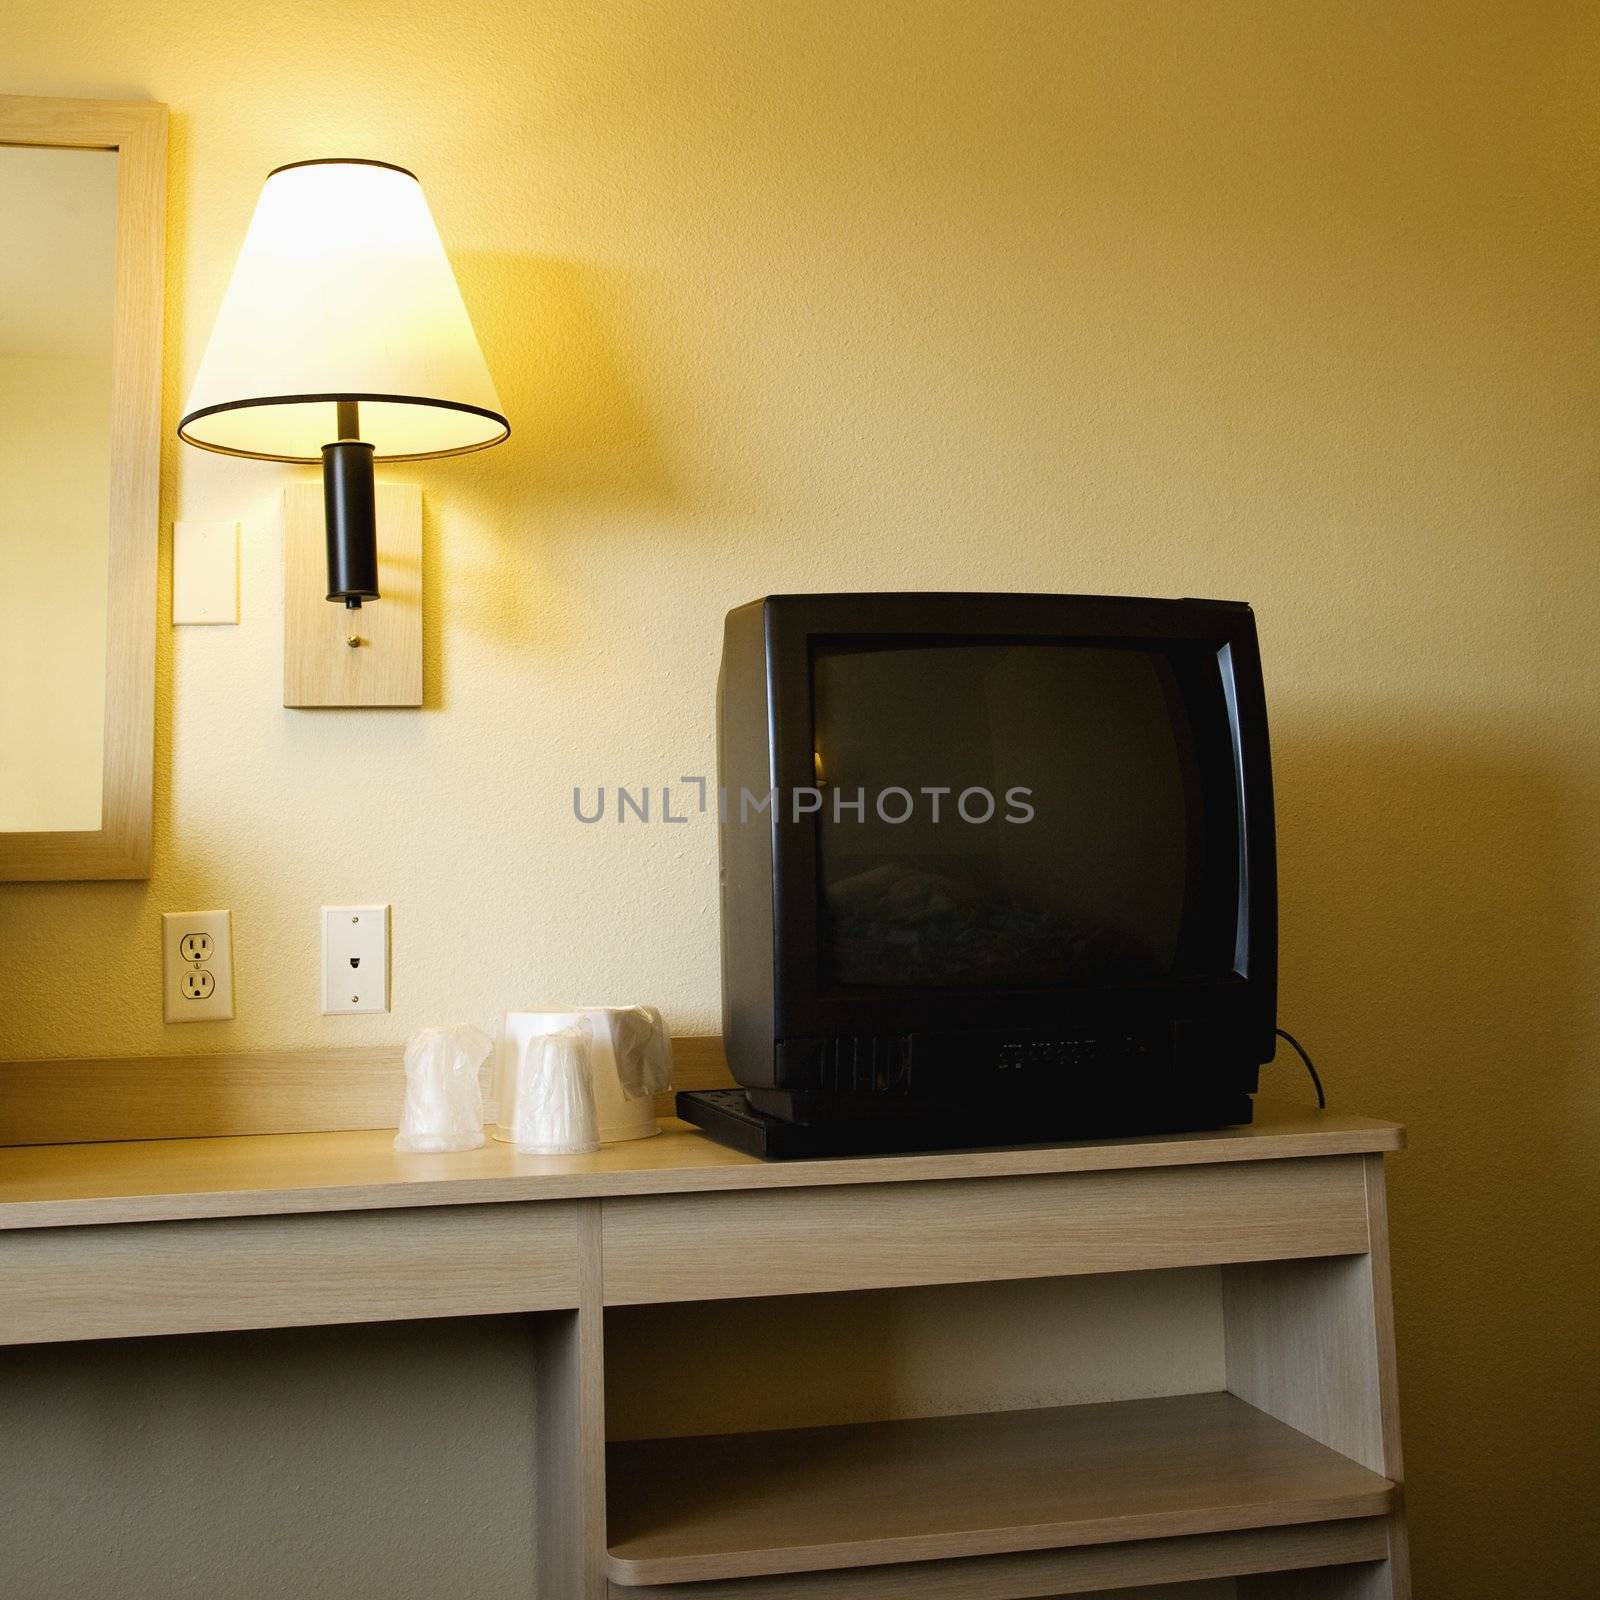 Interior shot of motel room with TV set on nightstand next to wall lamp.